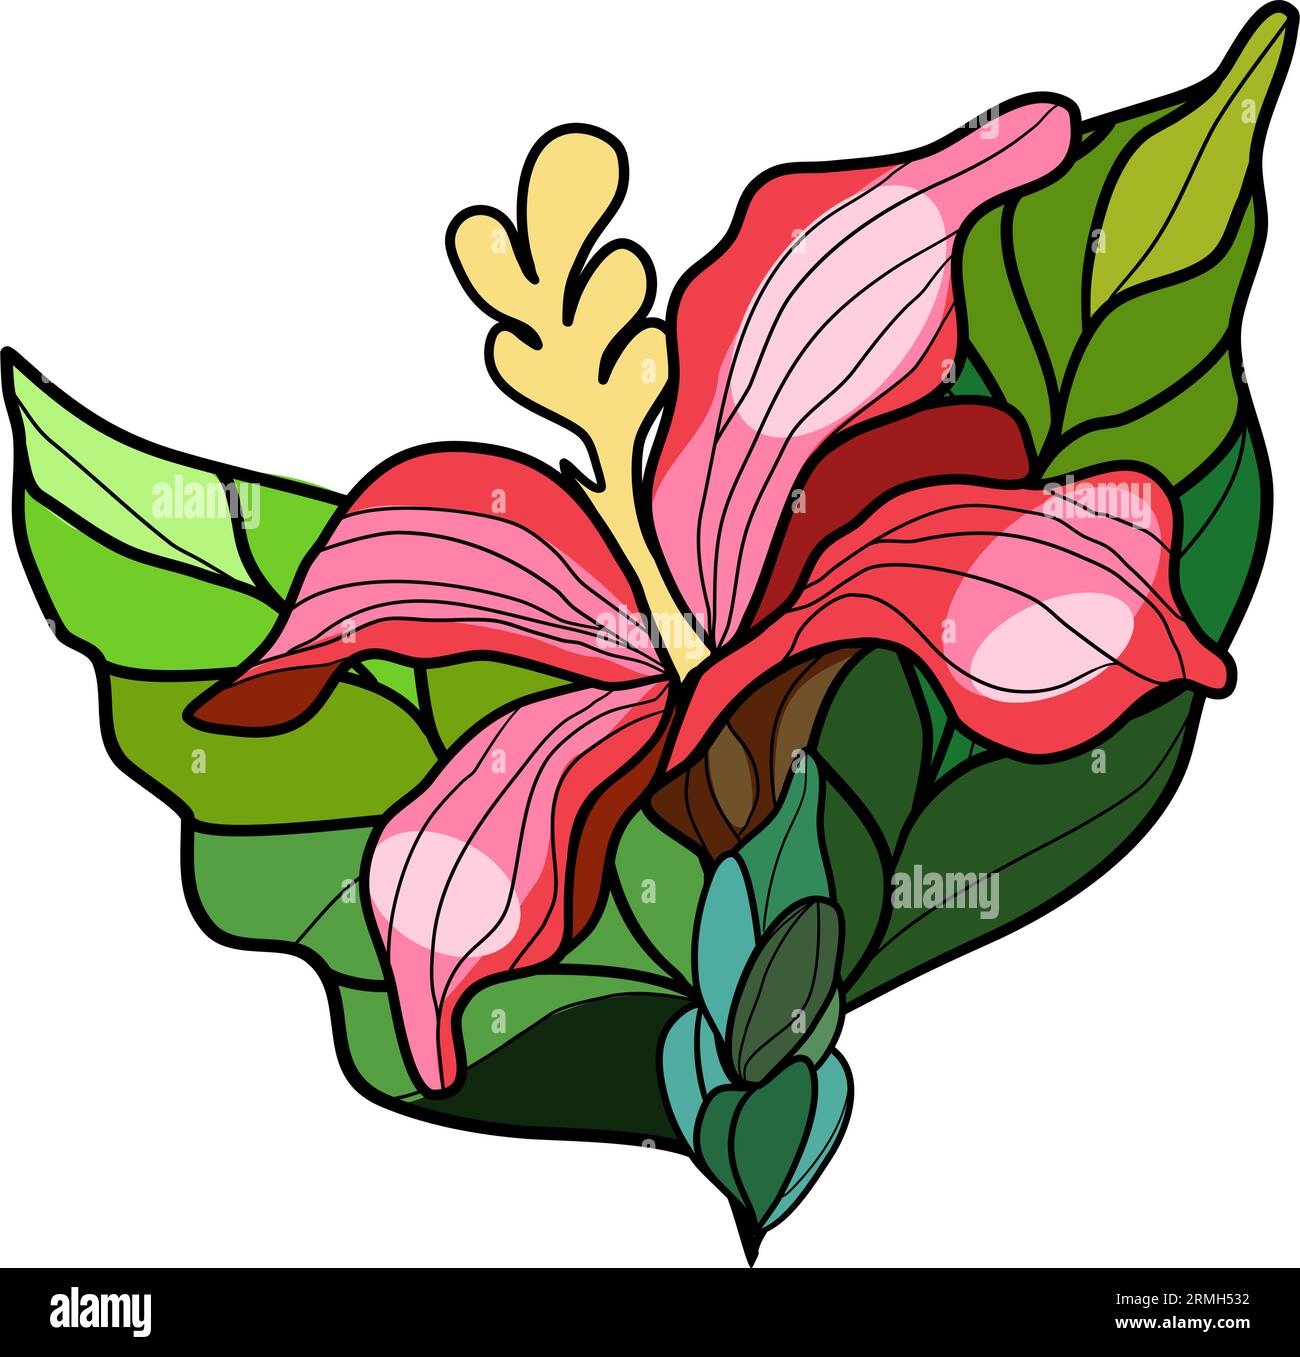 Lily flower and leaves. Vector illustration in stained glass window technique Stock Vector